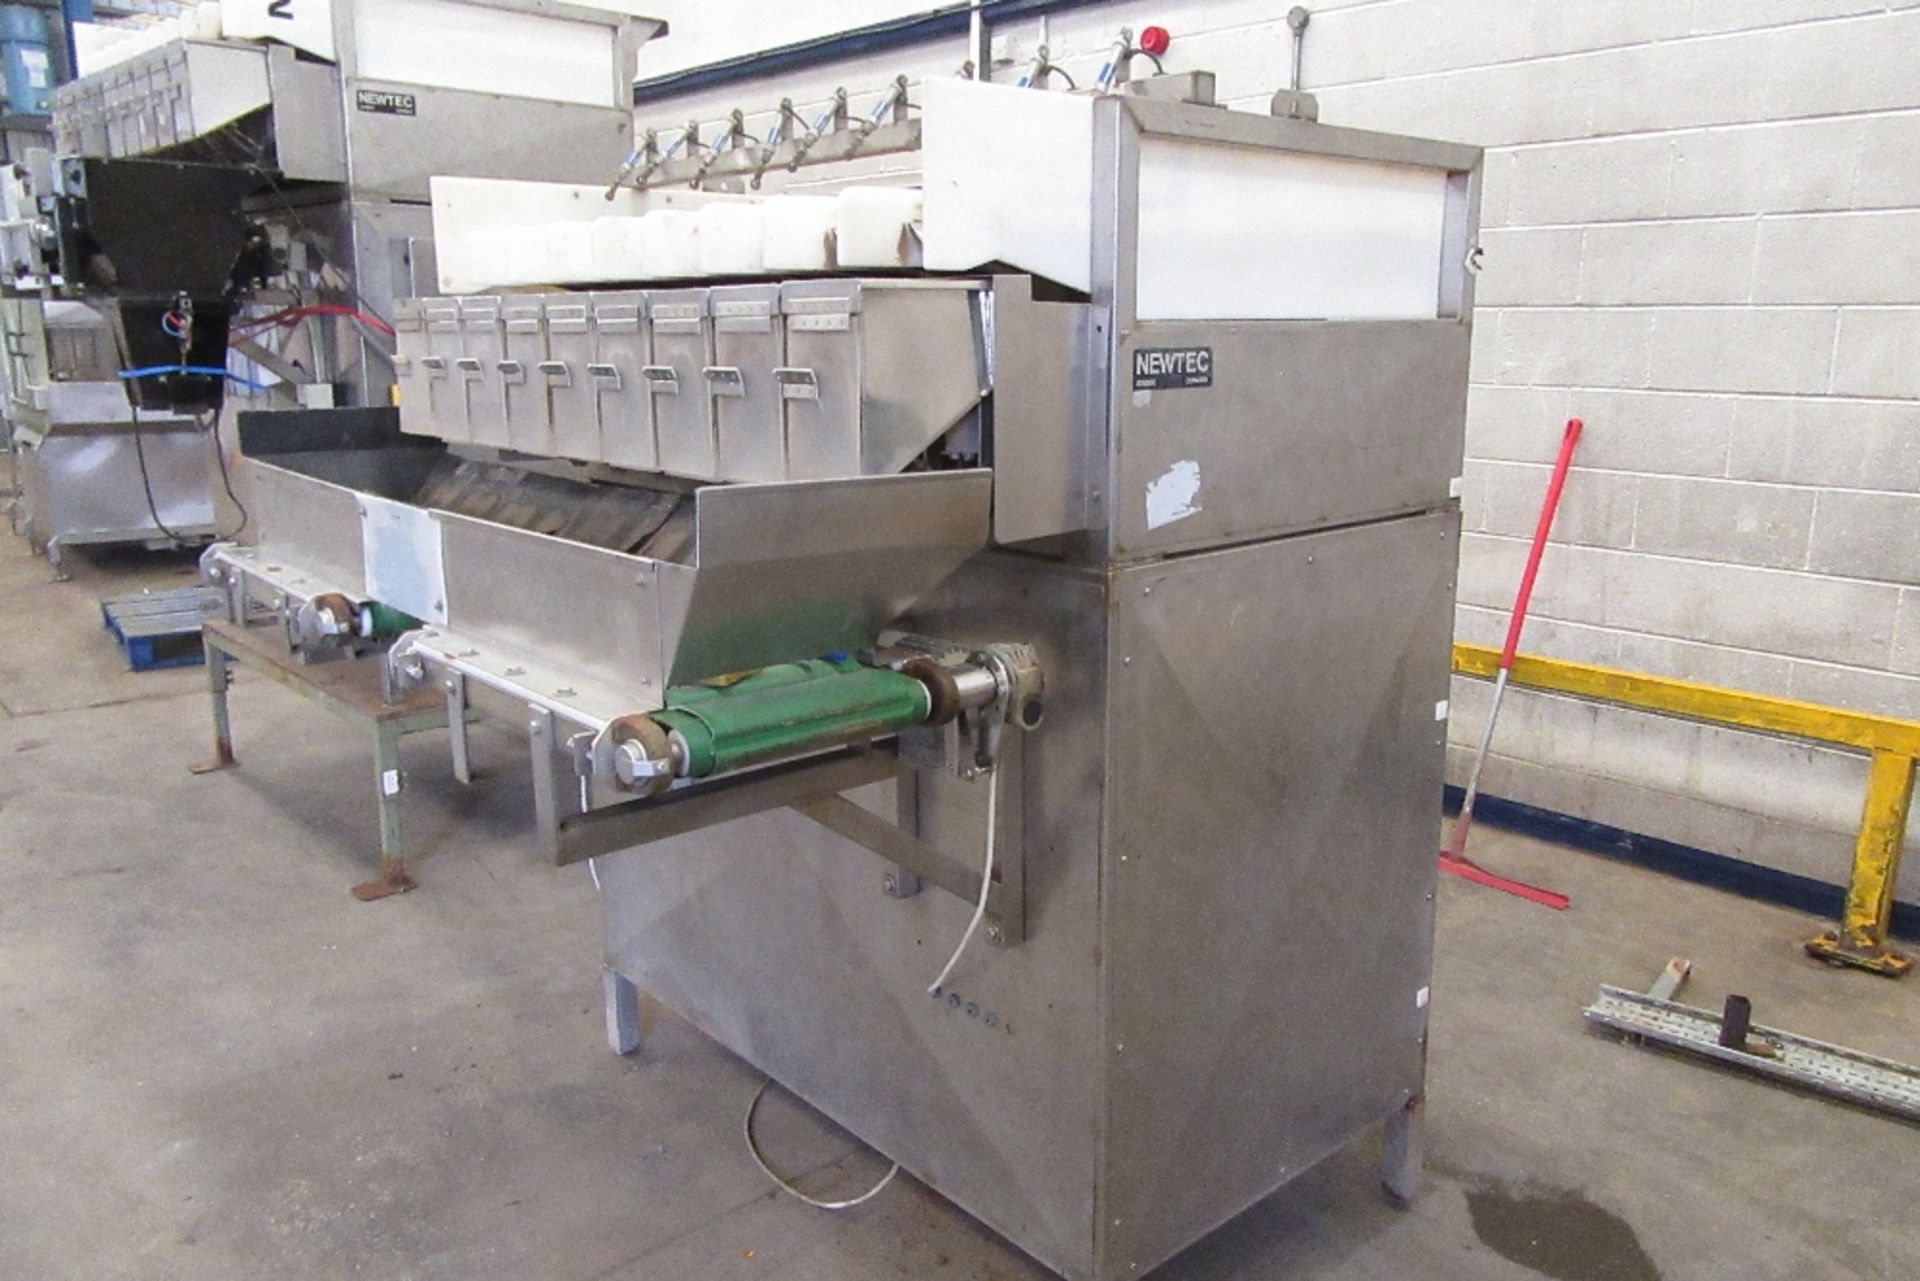 Newtec 2009 Stainless Steel 9 Head Weigher c/w Centre Fill Conveyors - Image 3 of 6